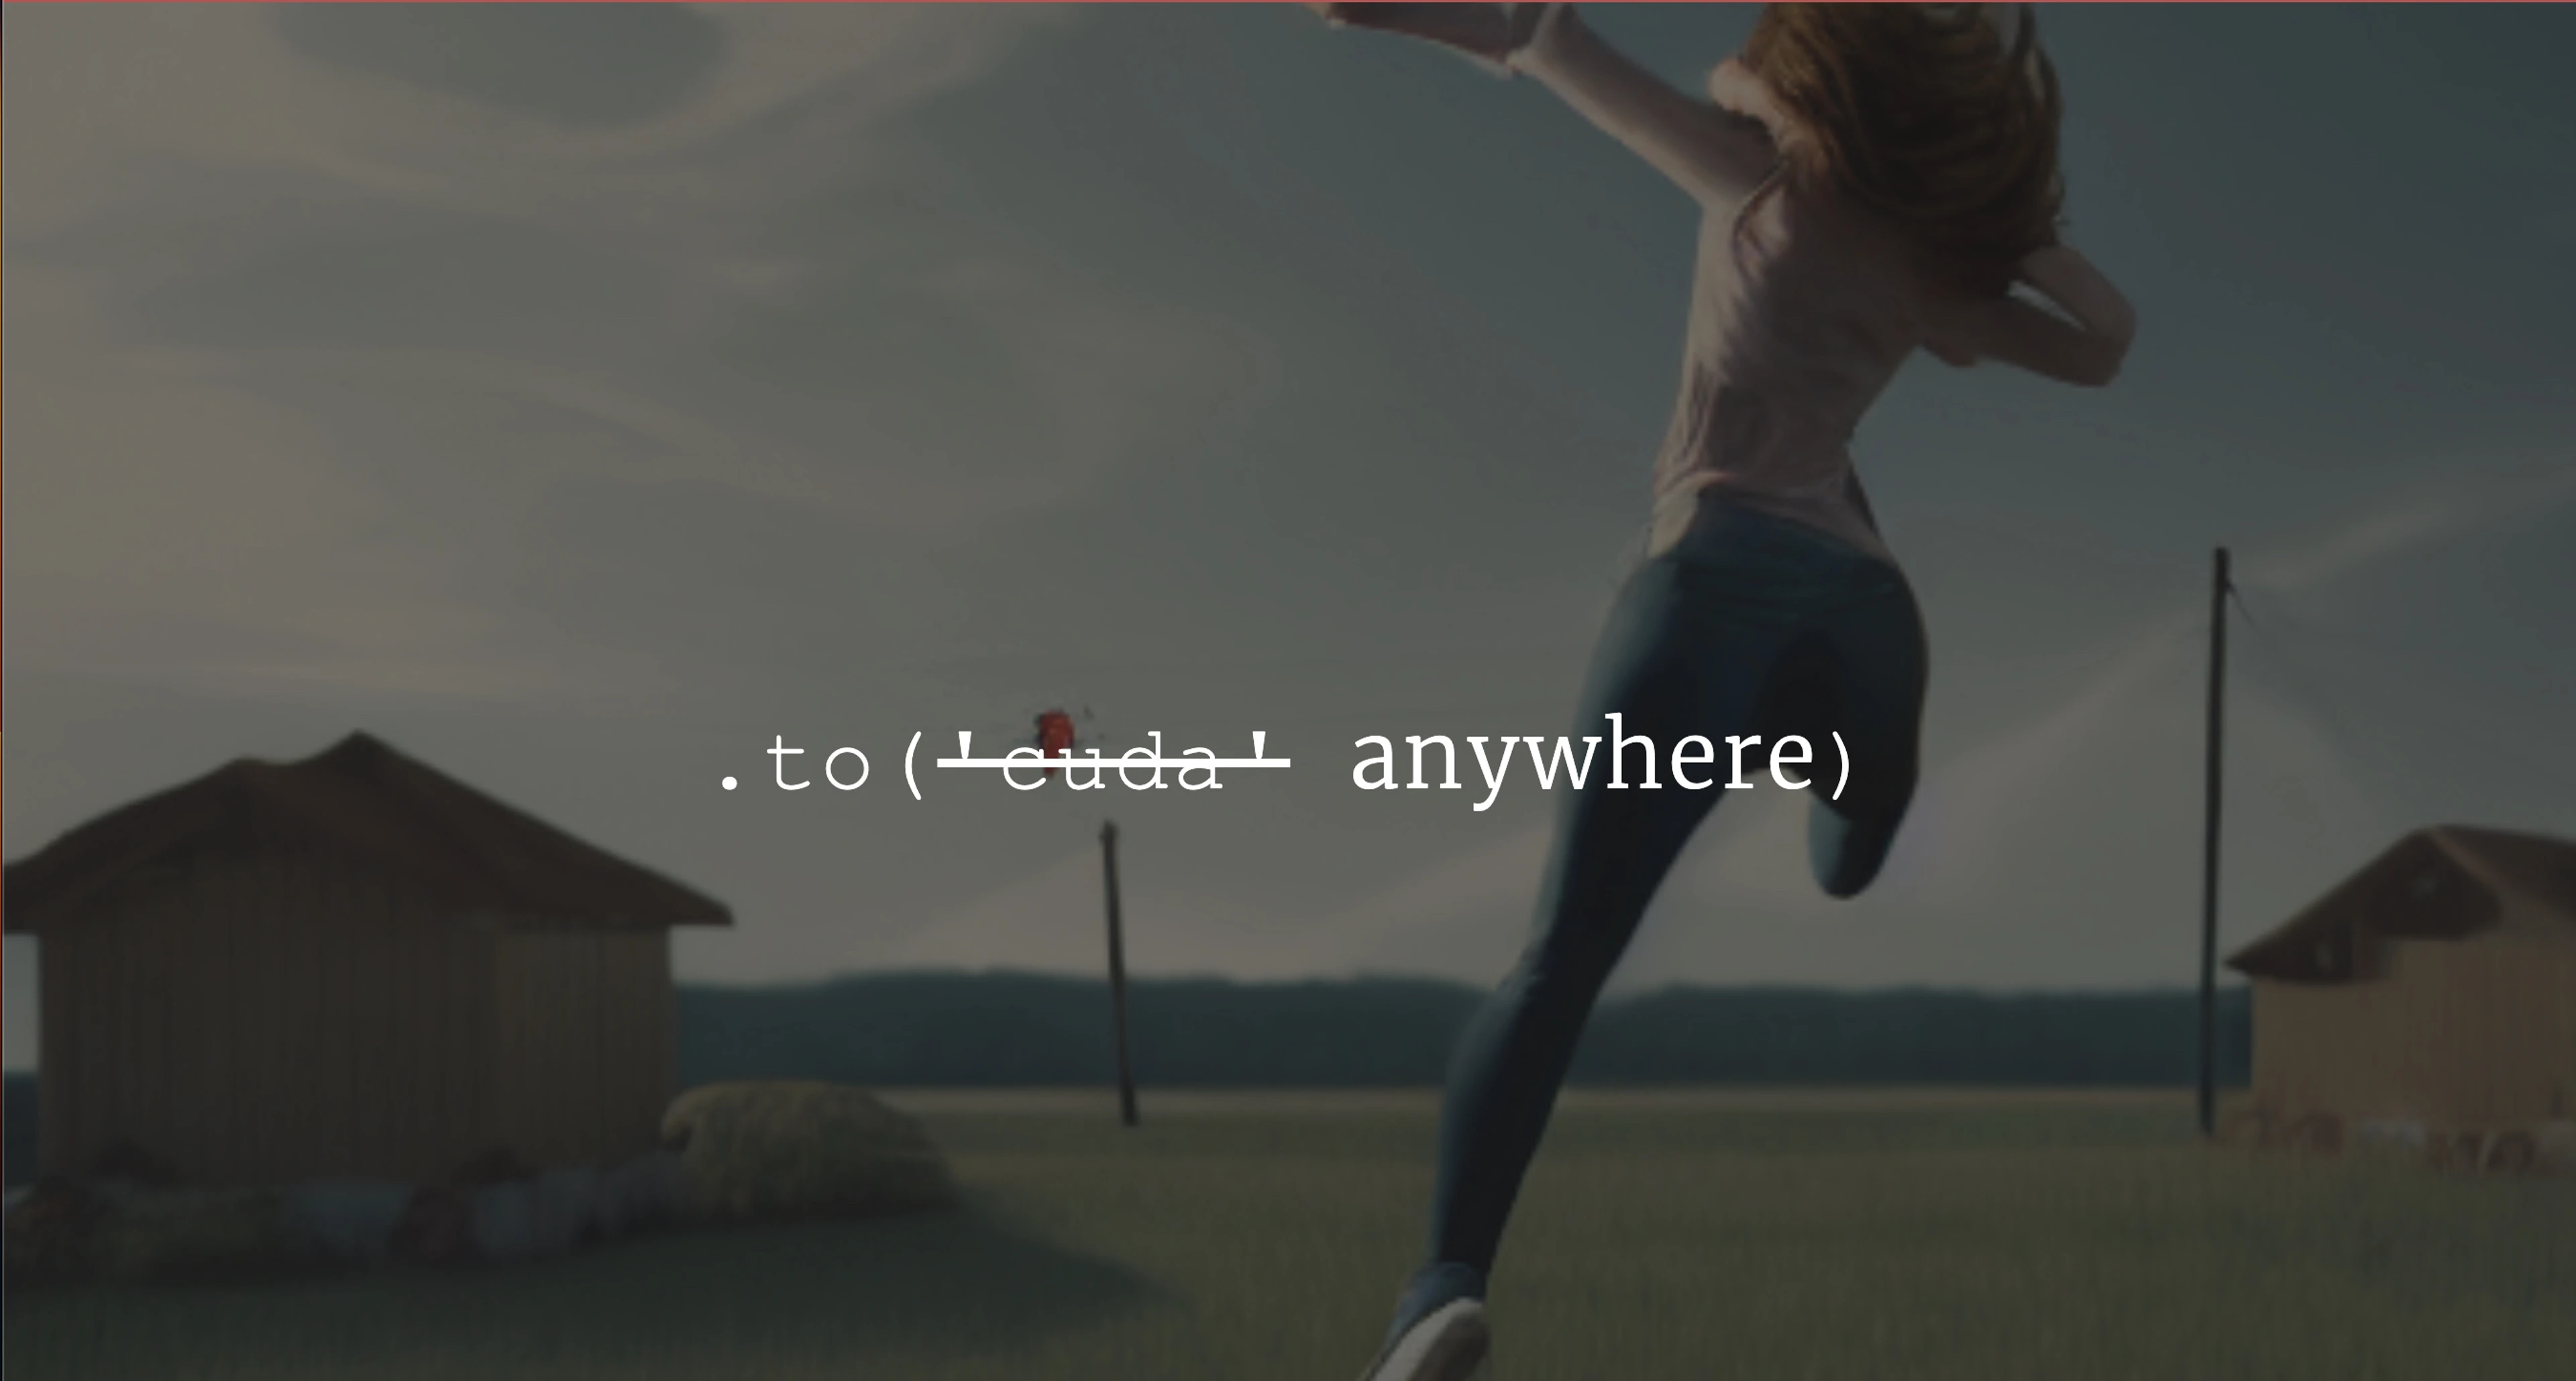 An image of a woman running in a field, overlayed by the text ".to('cuda')" with the word "cuda" crossed out and replaced with "anywhere"